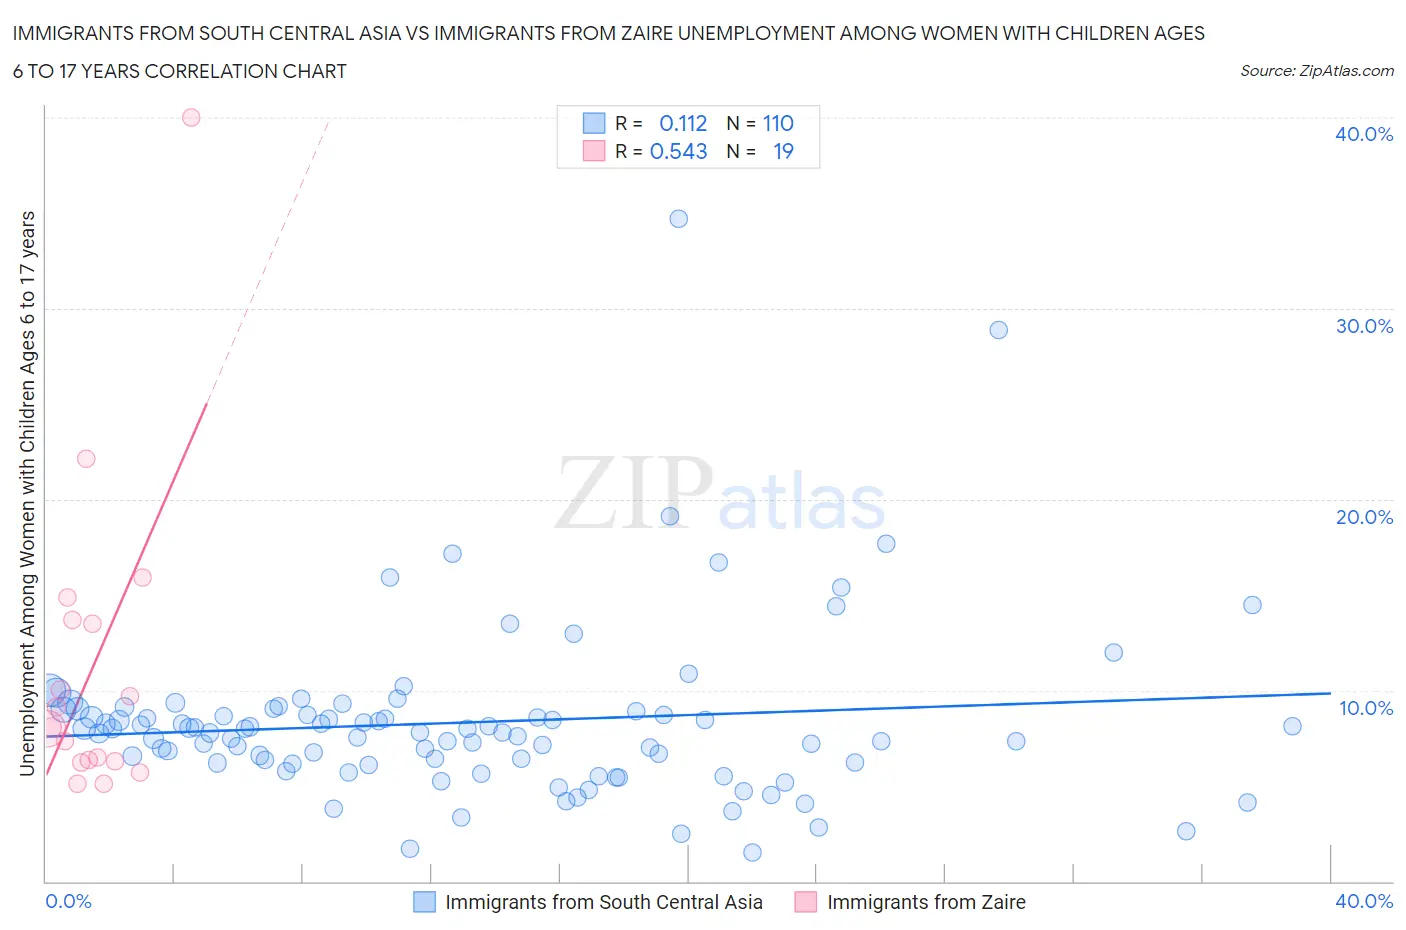 Immigrants from South Central Asia vs Immigrants from Zaire Unemployment Among Women with Children Ages 6 to 17 years